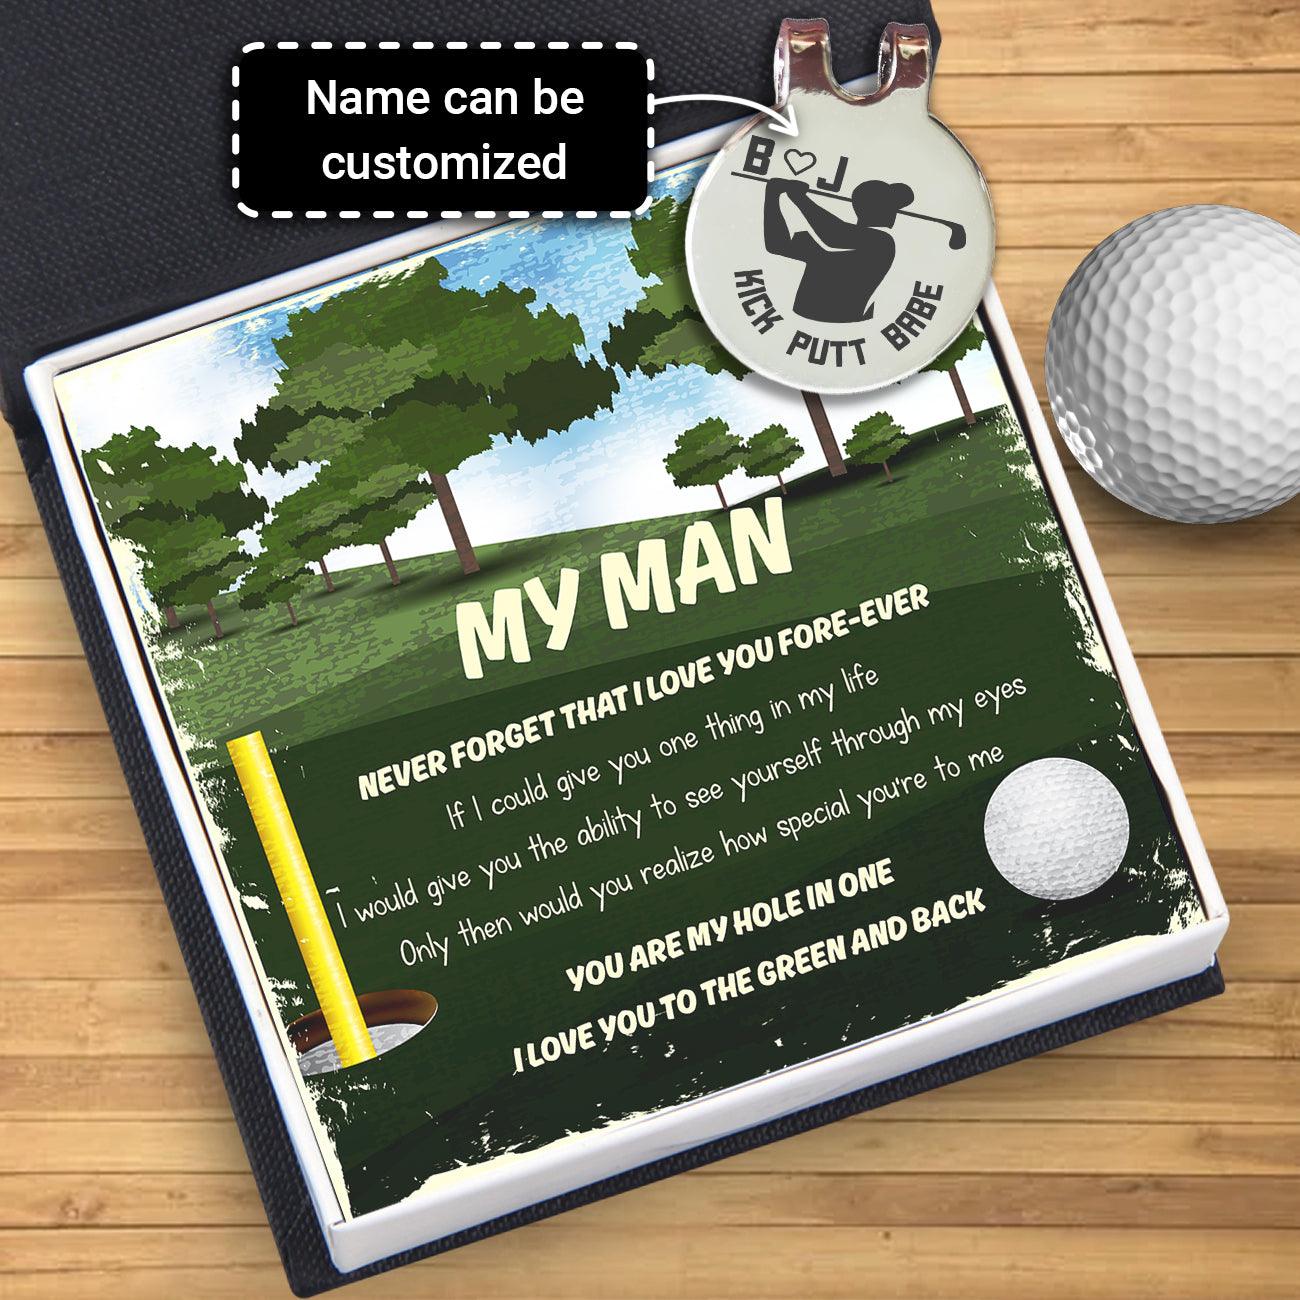 Personalised Golf Marker - Golf - To My Man - How Special You're To Me - Augata26002 - Gifts Holder